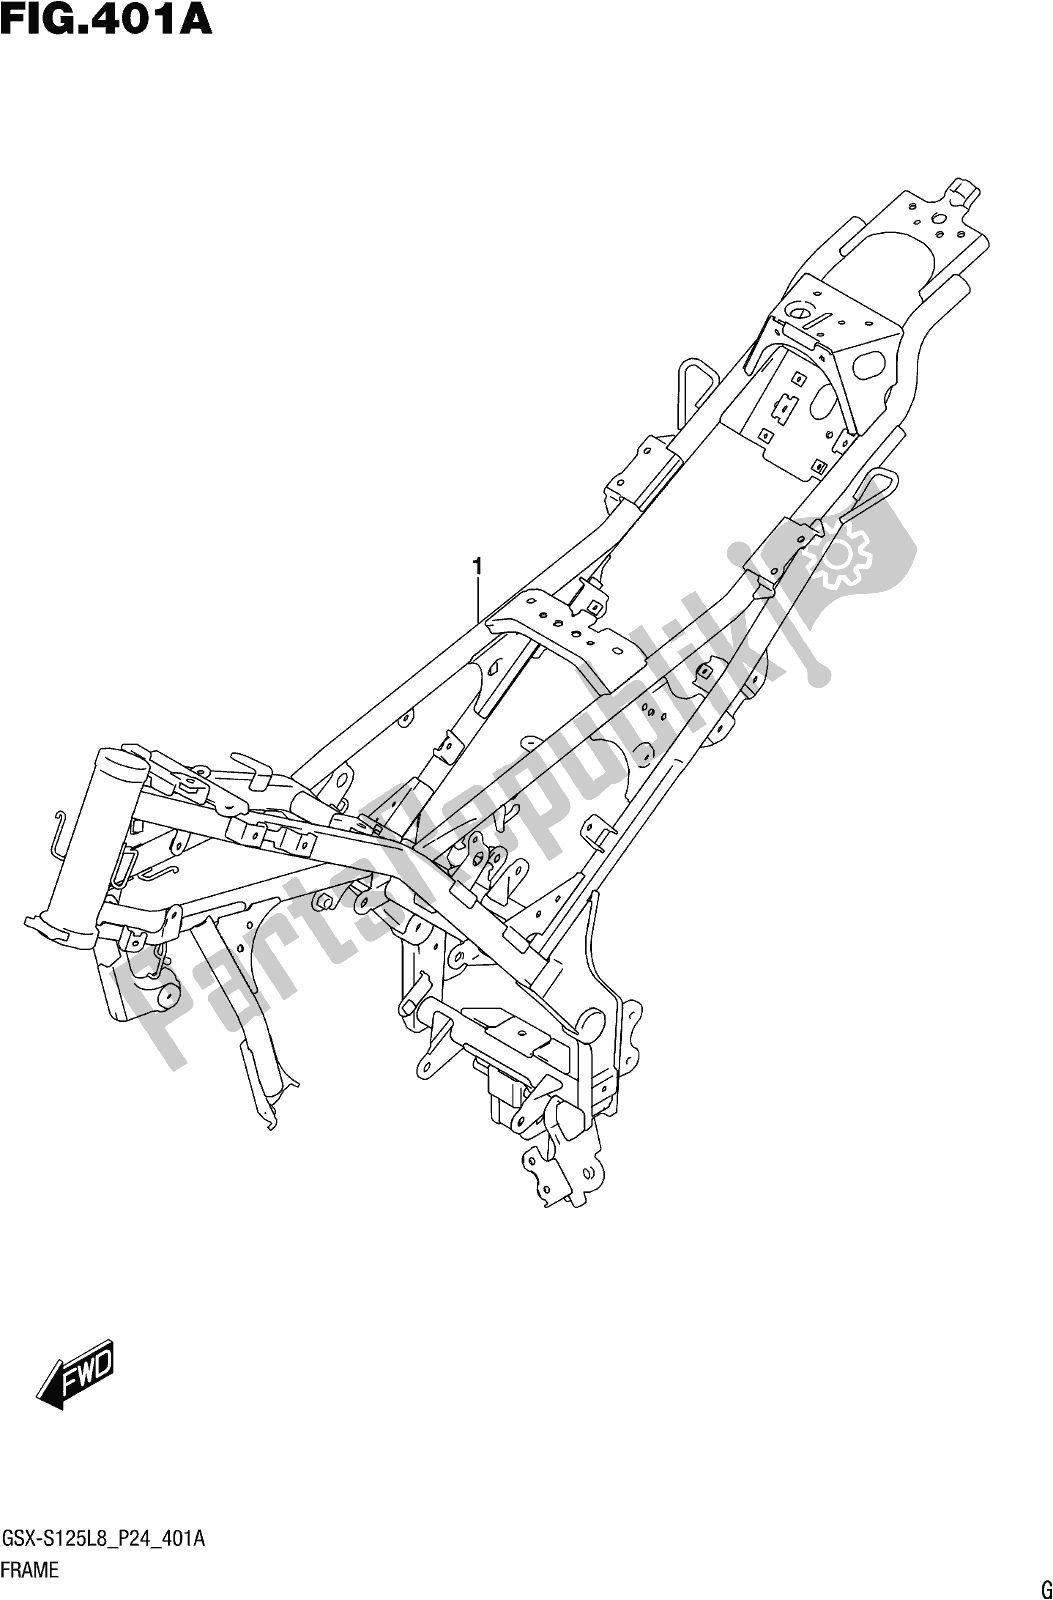 All parts for the Fig. 401a Frame of the Suzuki Gsx-s 125 ML 2018